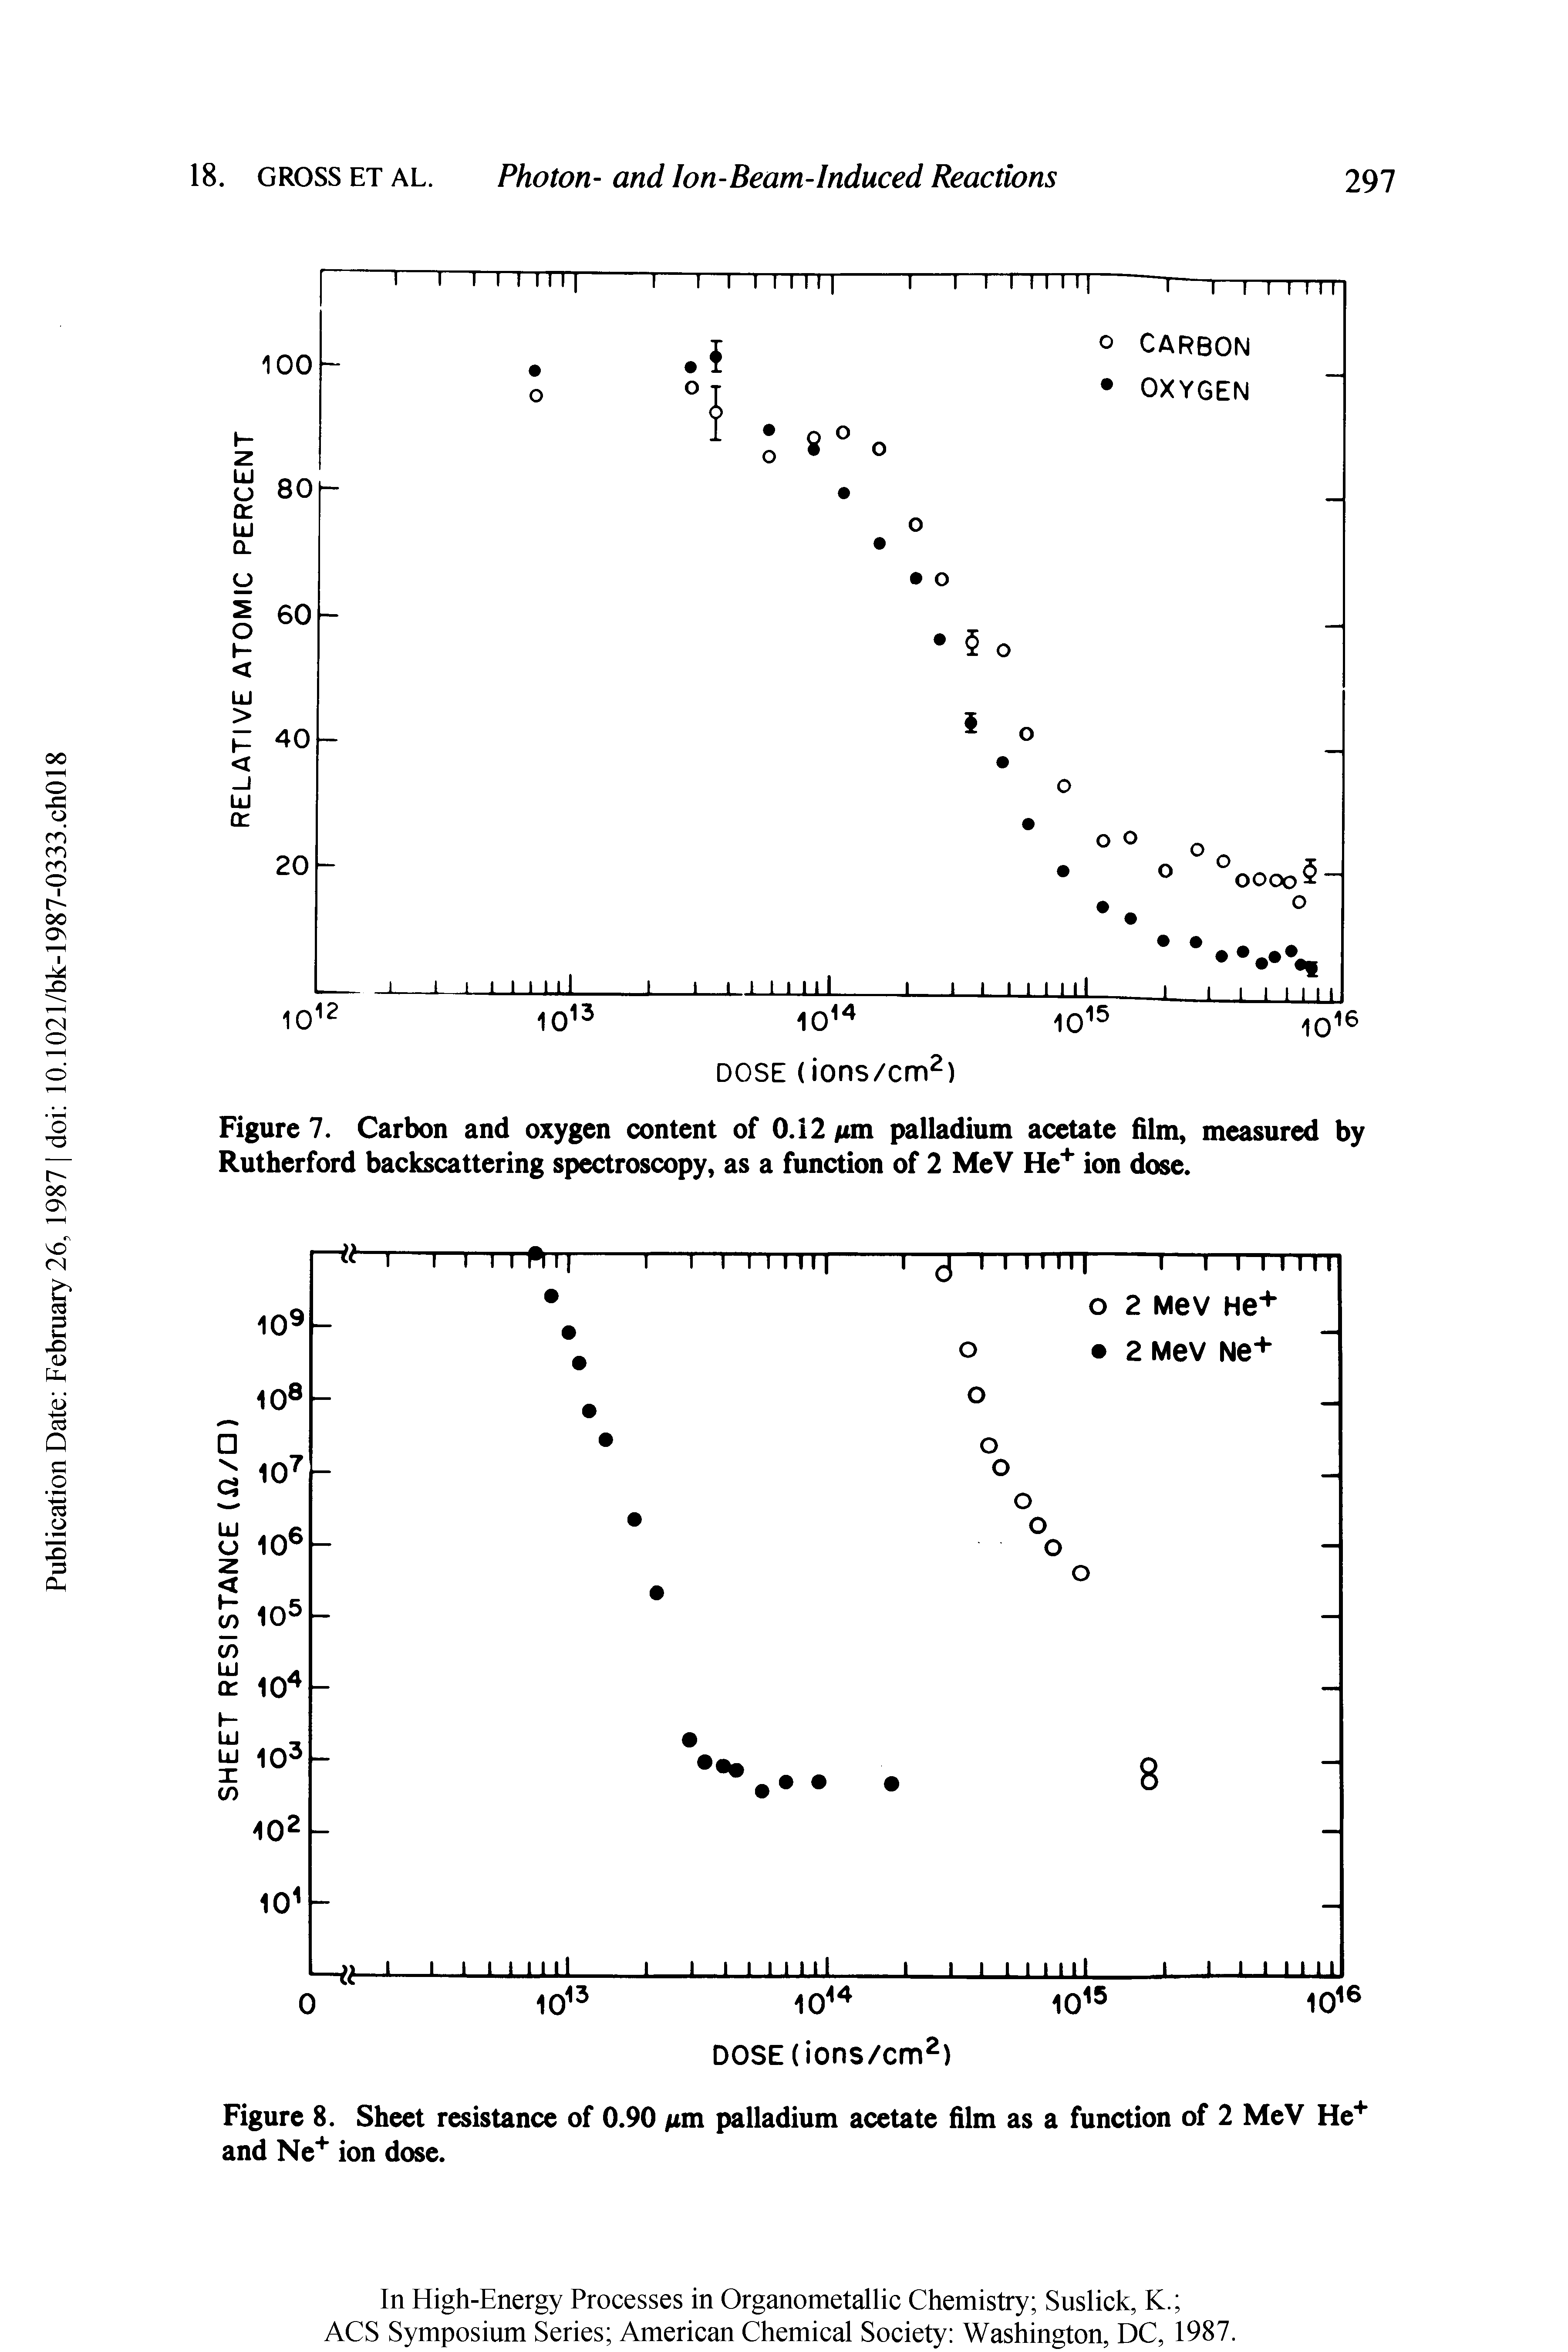 Figure 8. Sheet resistance of 0.90 fim palladium acetate film as a function of 2 MeV He+ and Ne+ ion dose.